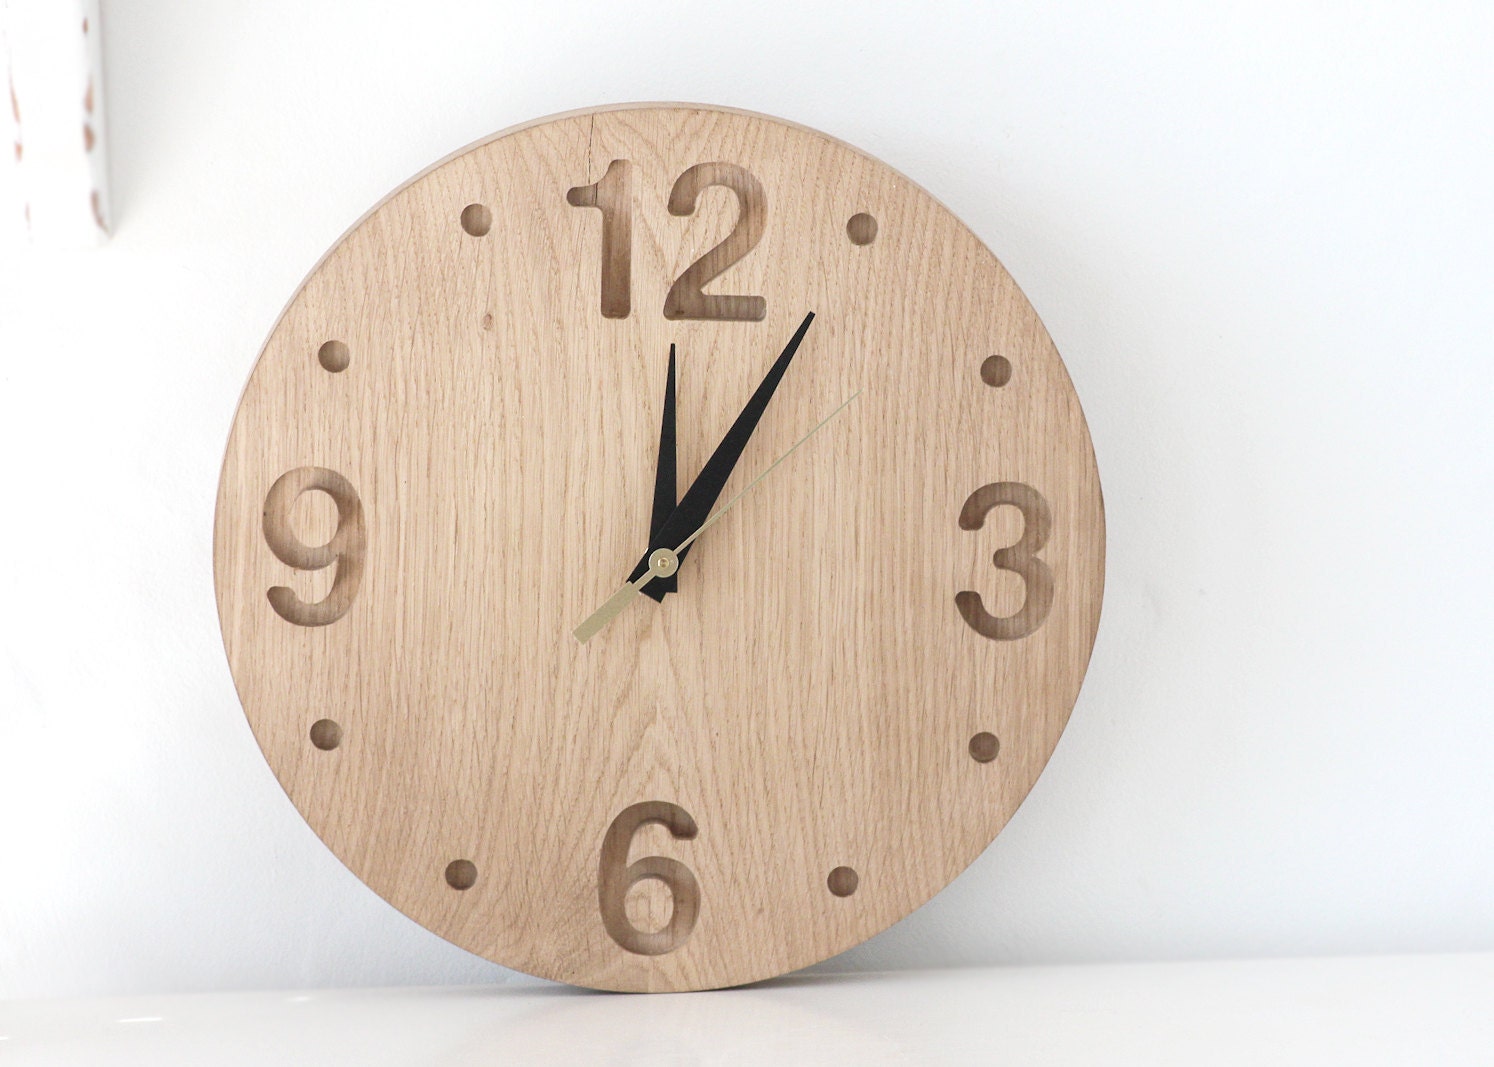 Wall clock made out of solid oak, convex round shape minimalistic style - DesignAtelierArticle